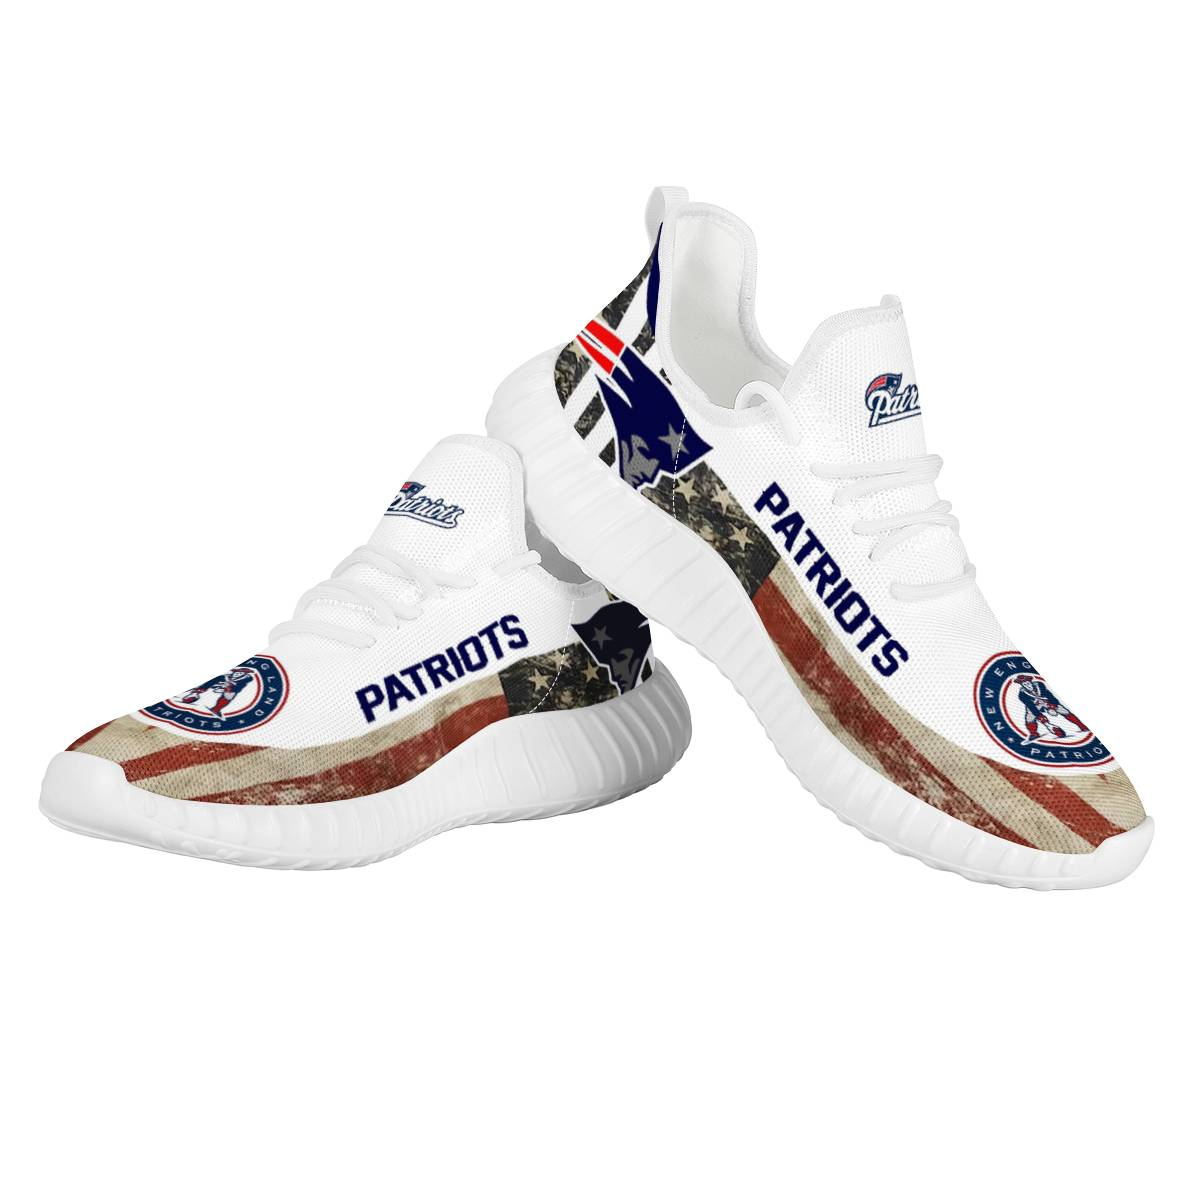 Women's New England Patriots Mesh Knit Sneakers/Shoes 017